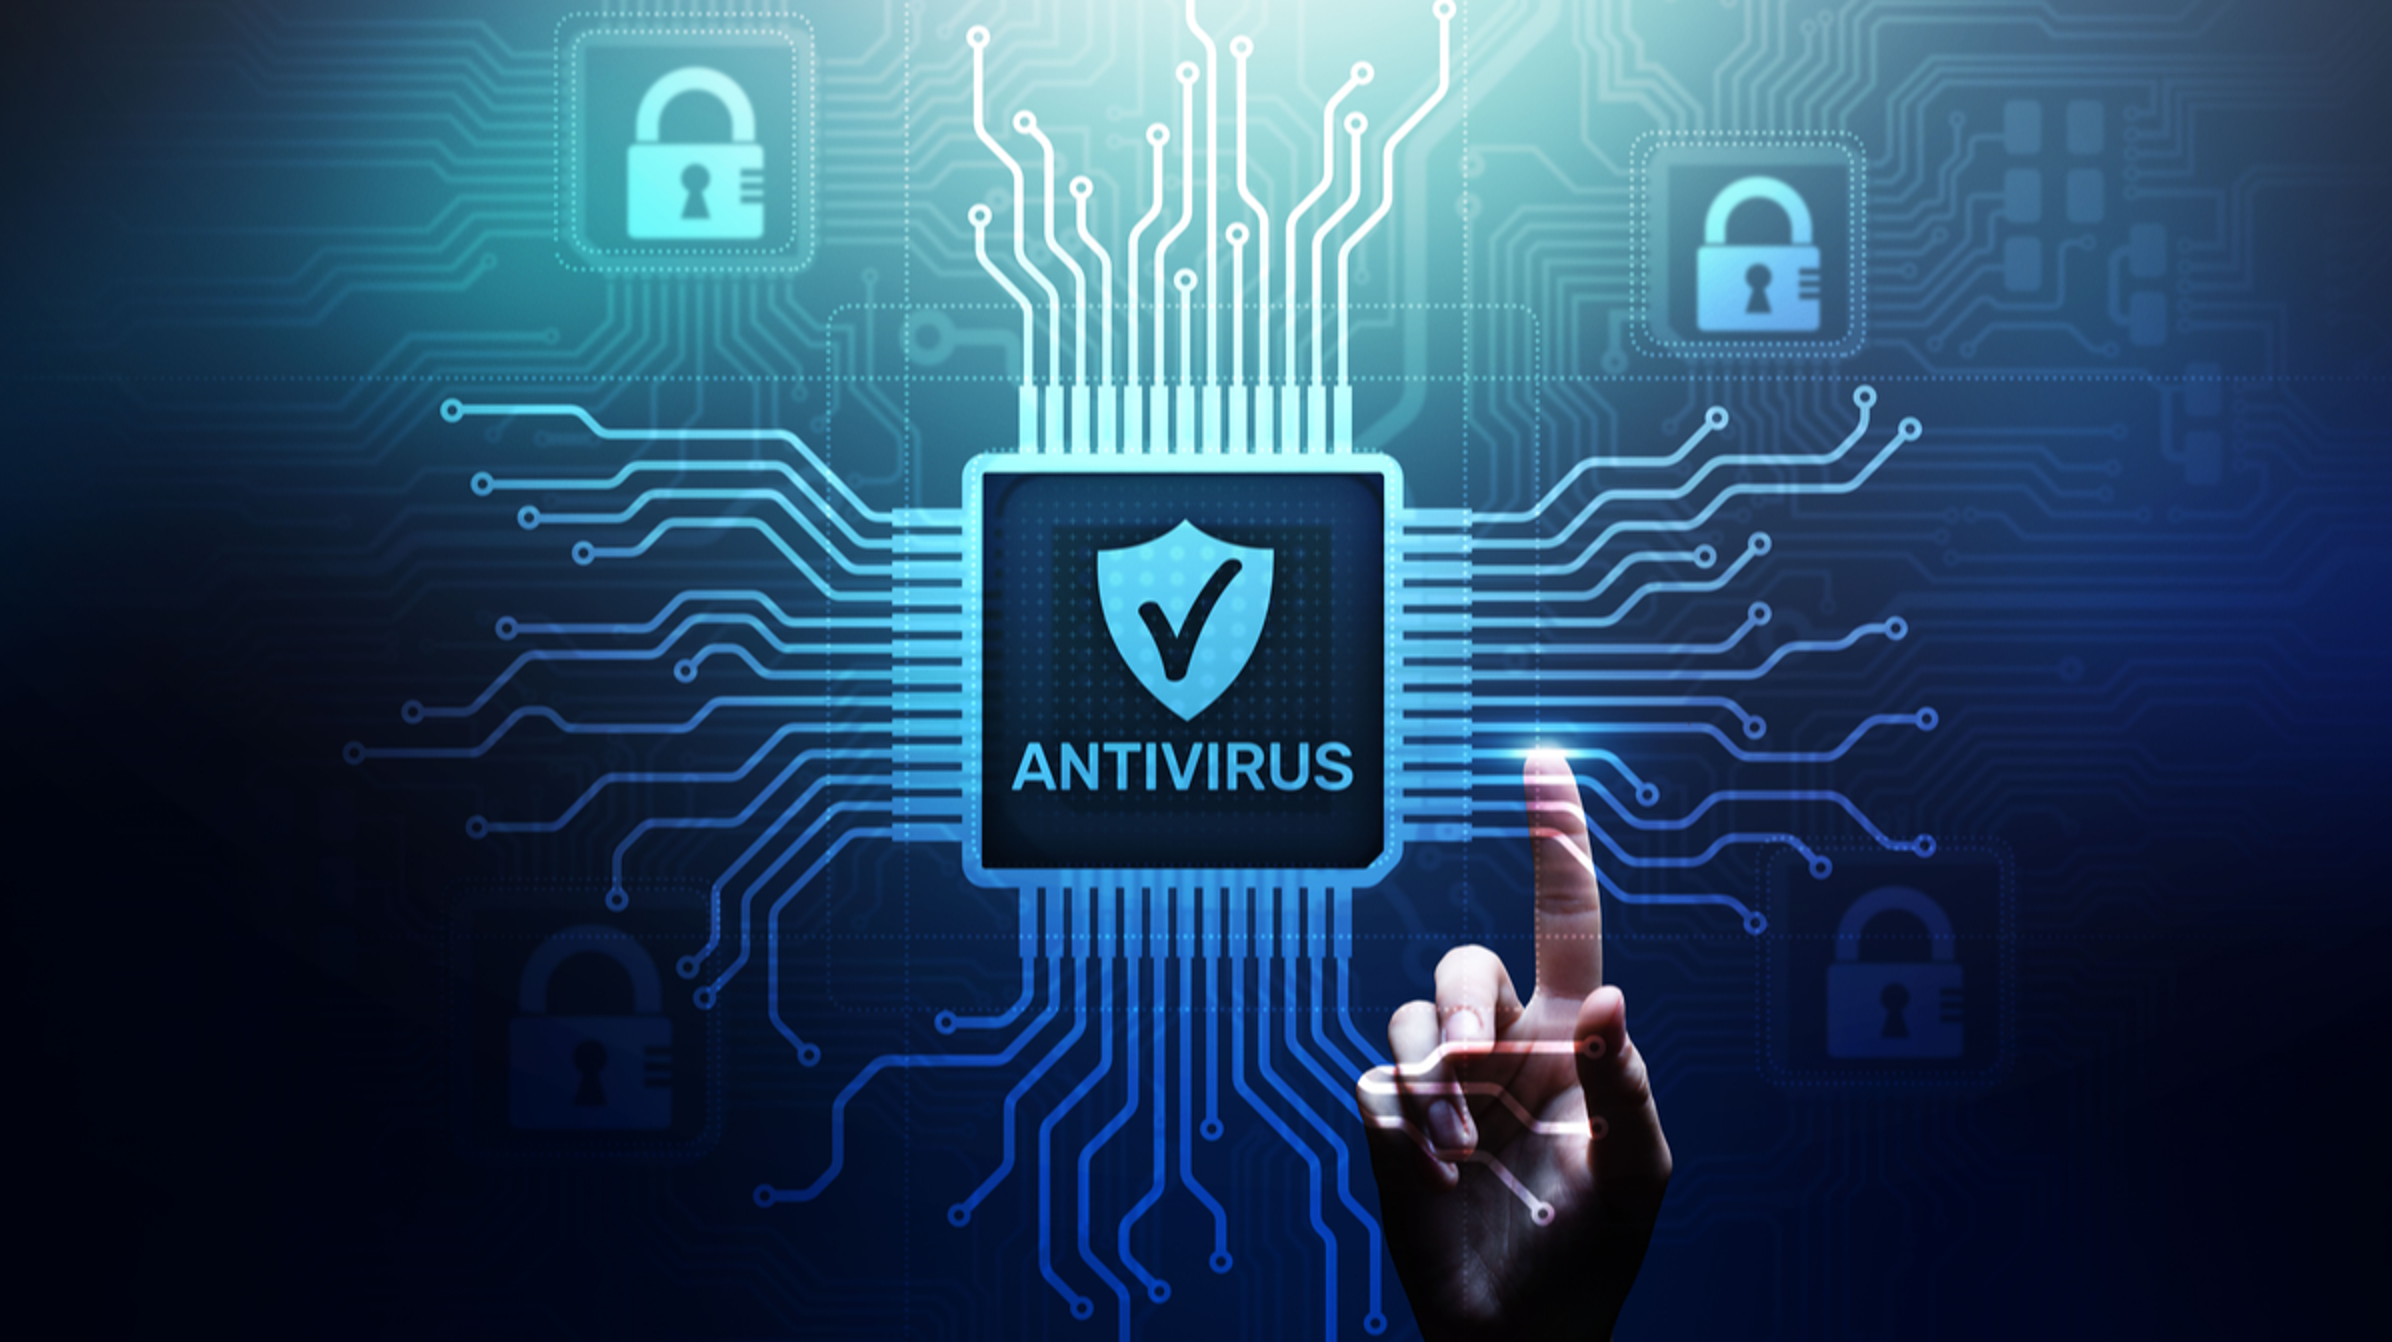 7 Essential Tips for Choosing and Using Antivirus Software